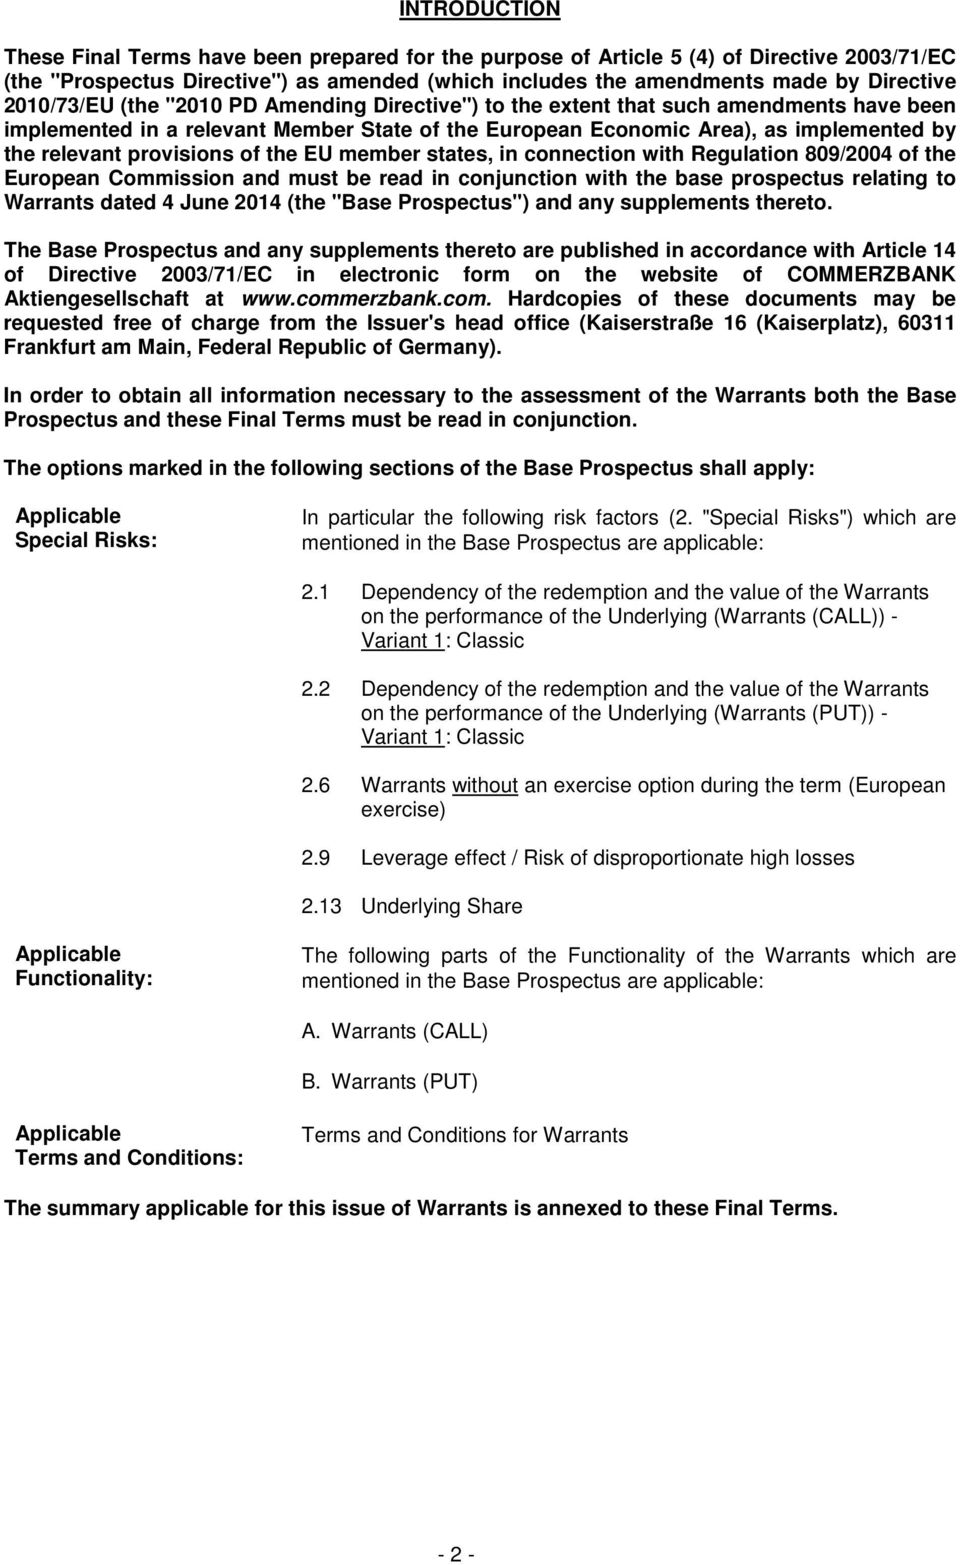 provisions of the EU member states, in connection with Regulation 809/2004 of the European Commission and must be read in conjunction with the base prospectus relating to Warrants dated 4 June 2014